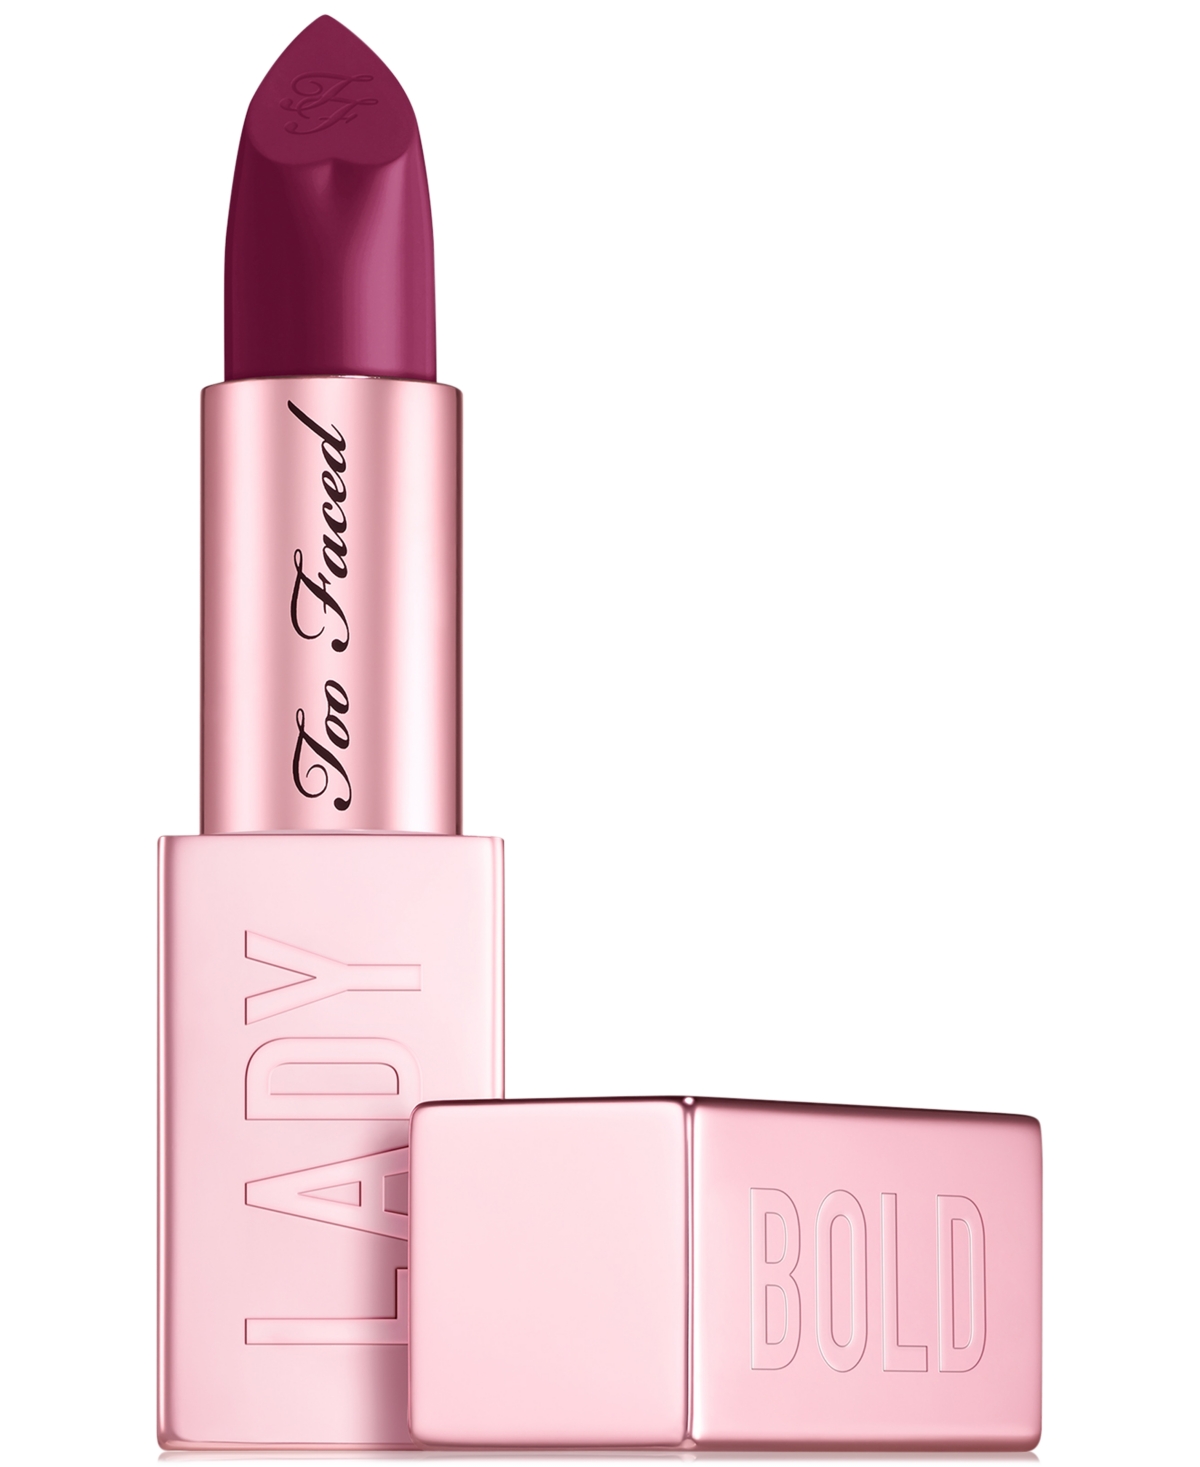 Too Faced Lady Bold Rich & Creamy High-impact Color Lipstick In Upgrade